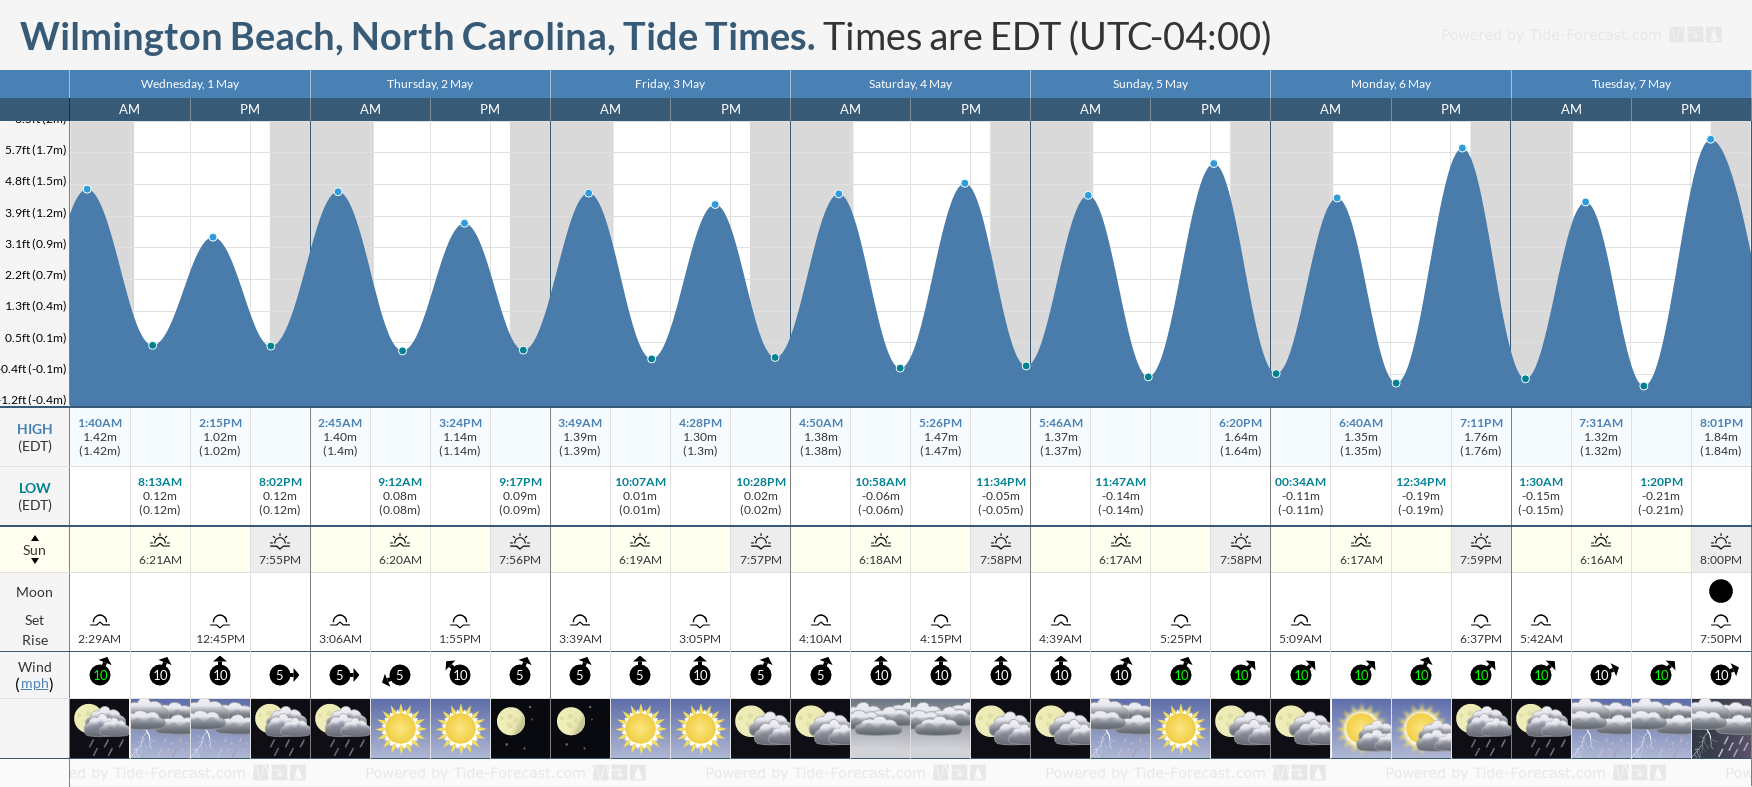 Wilmington Beach, North Carolina Tide Chart including high and low tide tide times for the next 7 days